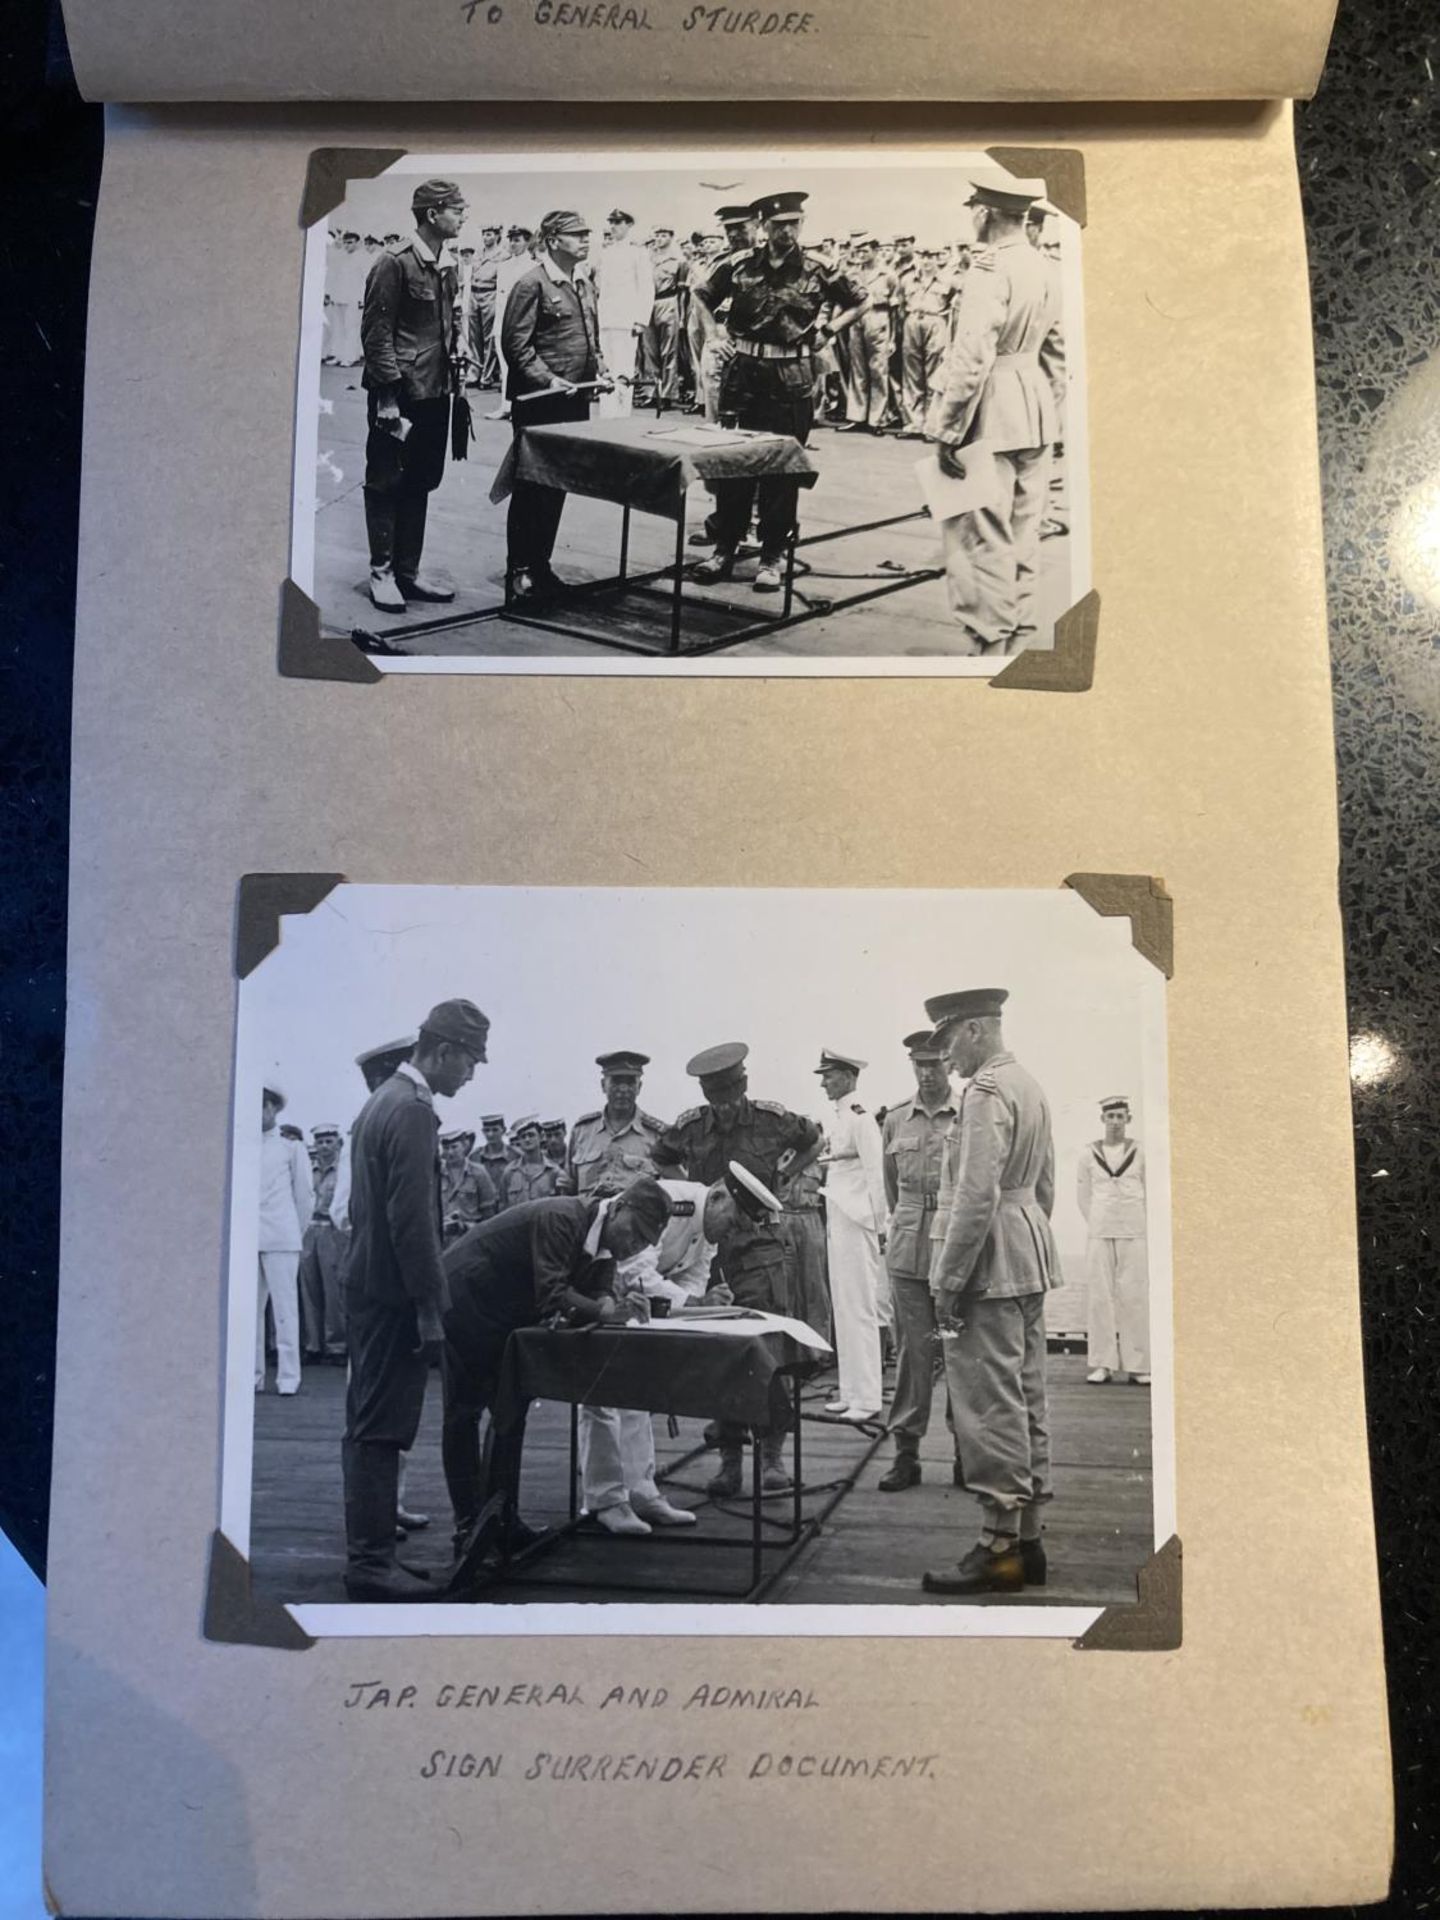 A WORLD WAR II PHOTOGRAPH ALBUM CONTAINING PHOTOGRAPHS OF THE JAPANESE SIGNING OF THE INSTRUMENT - Image 5 of 10